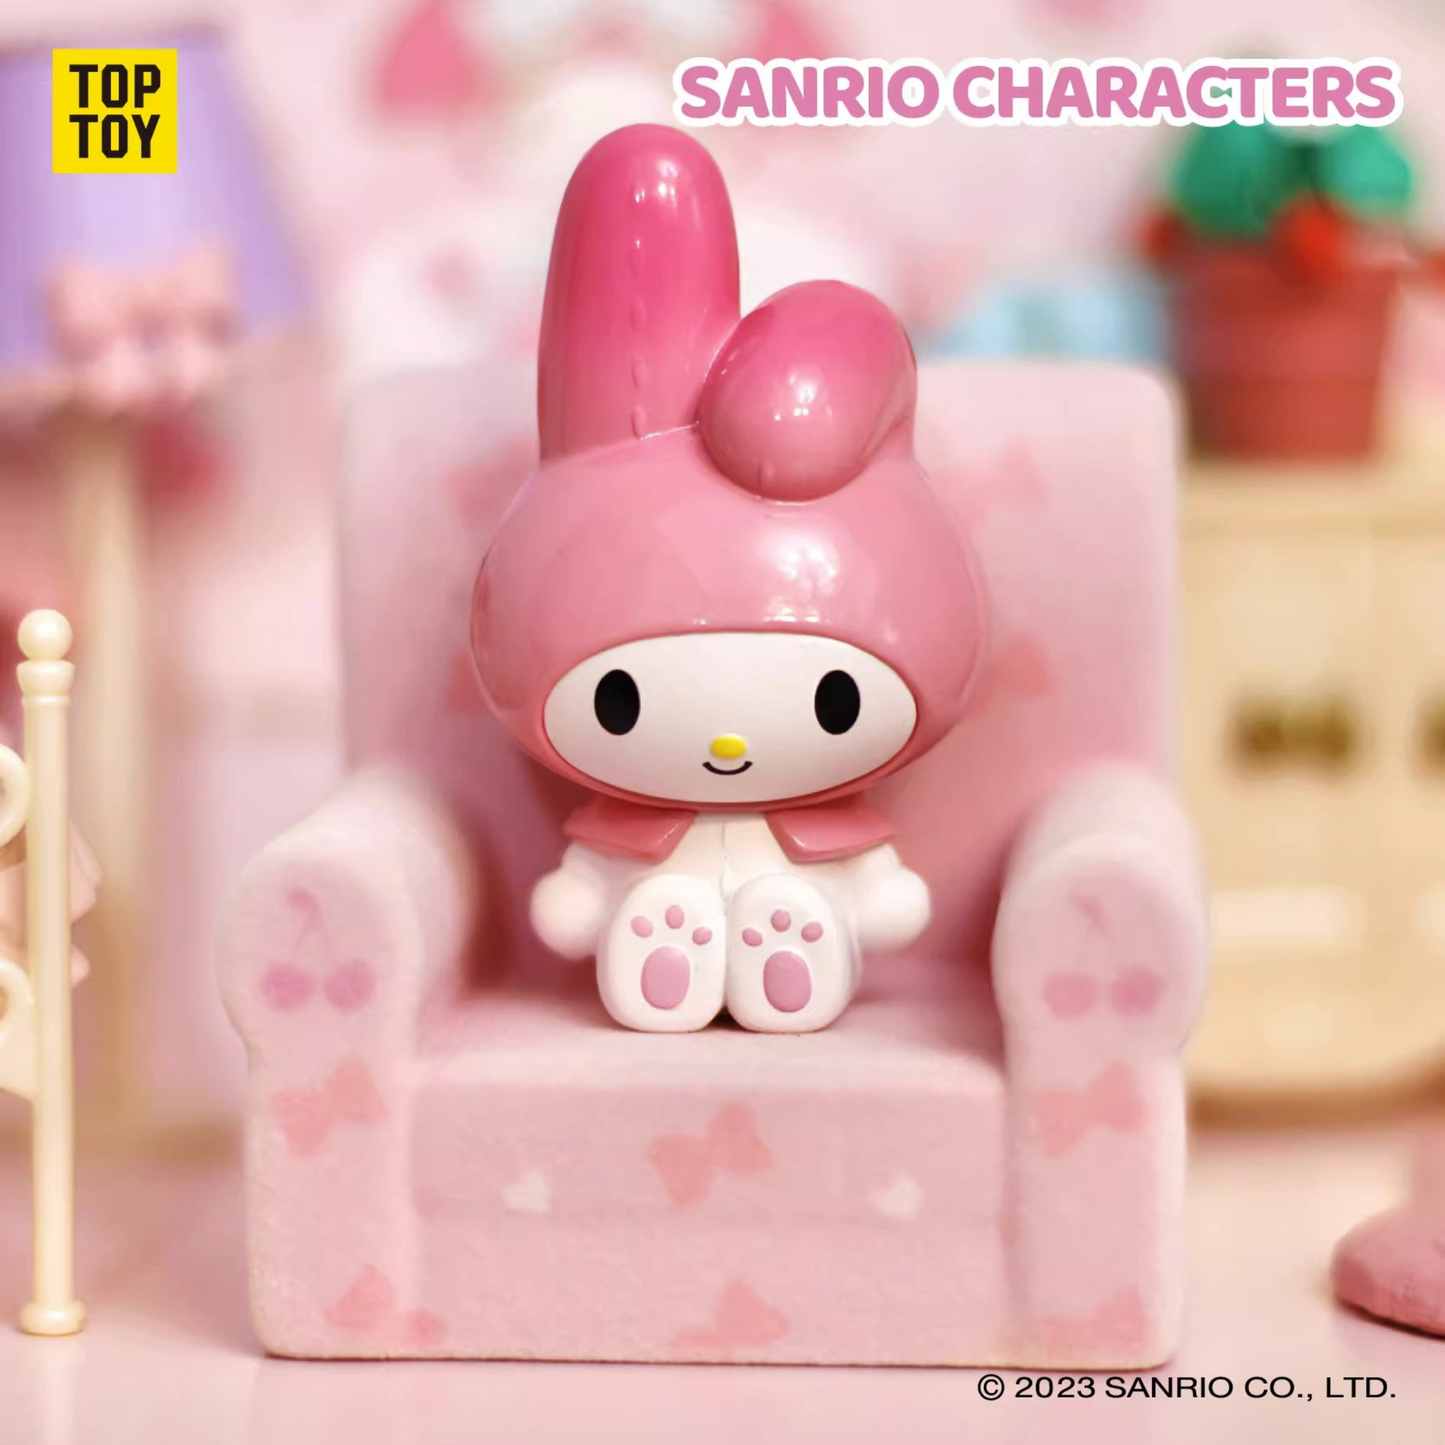 【Restock】Top Toy Sanrio Characters Sitting Dolls Series Blind Box